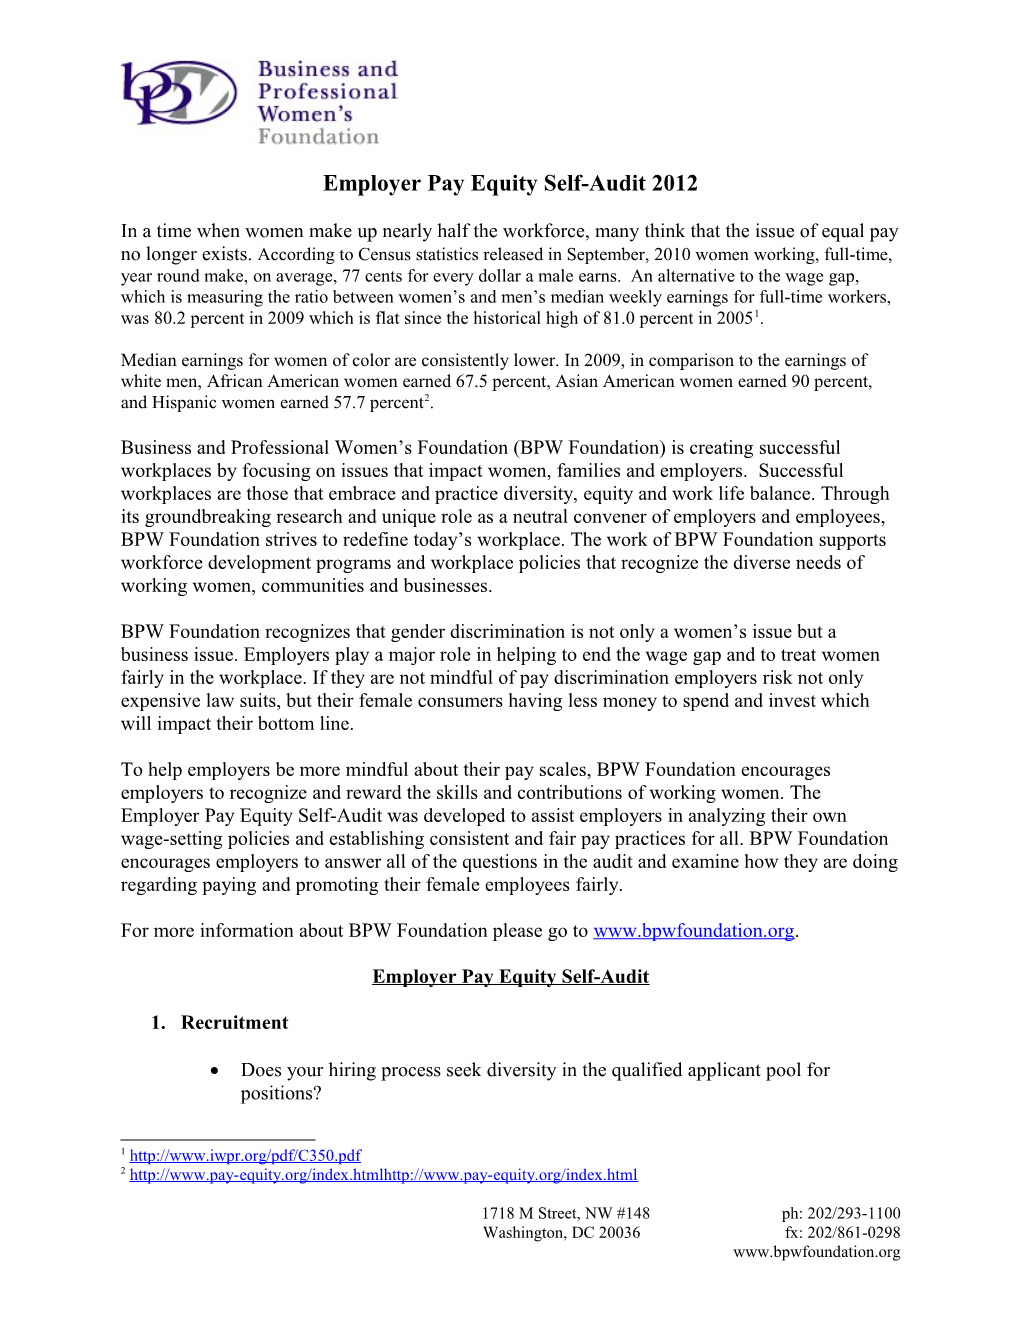 Employer Pay Equity Self-Audit 2012